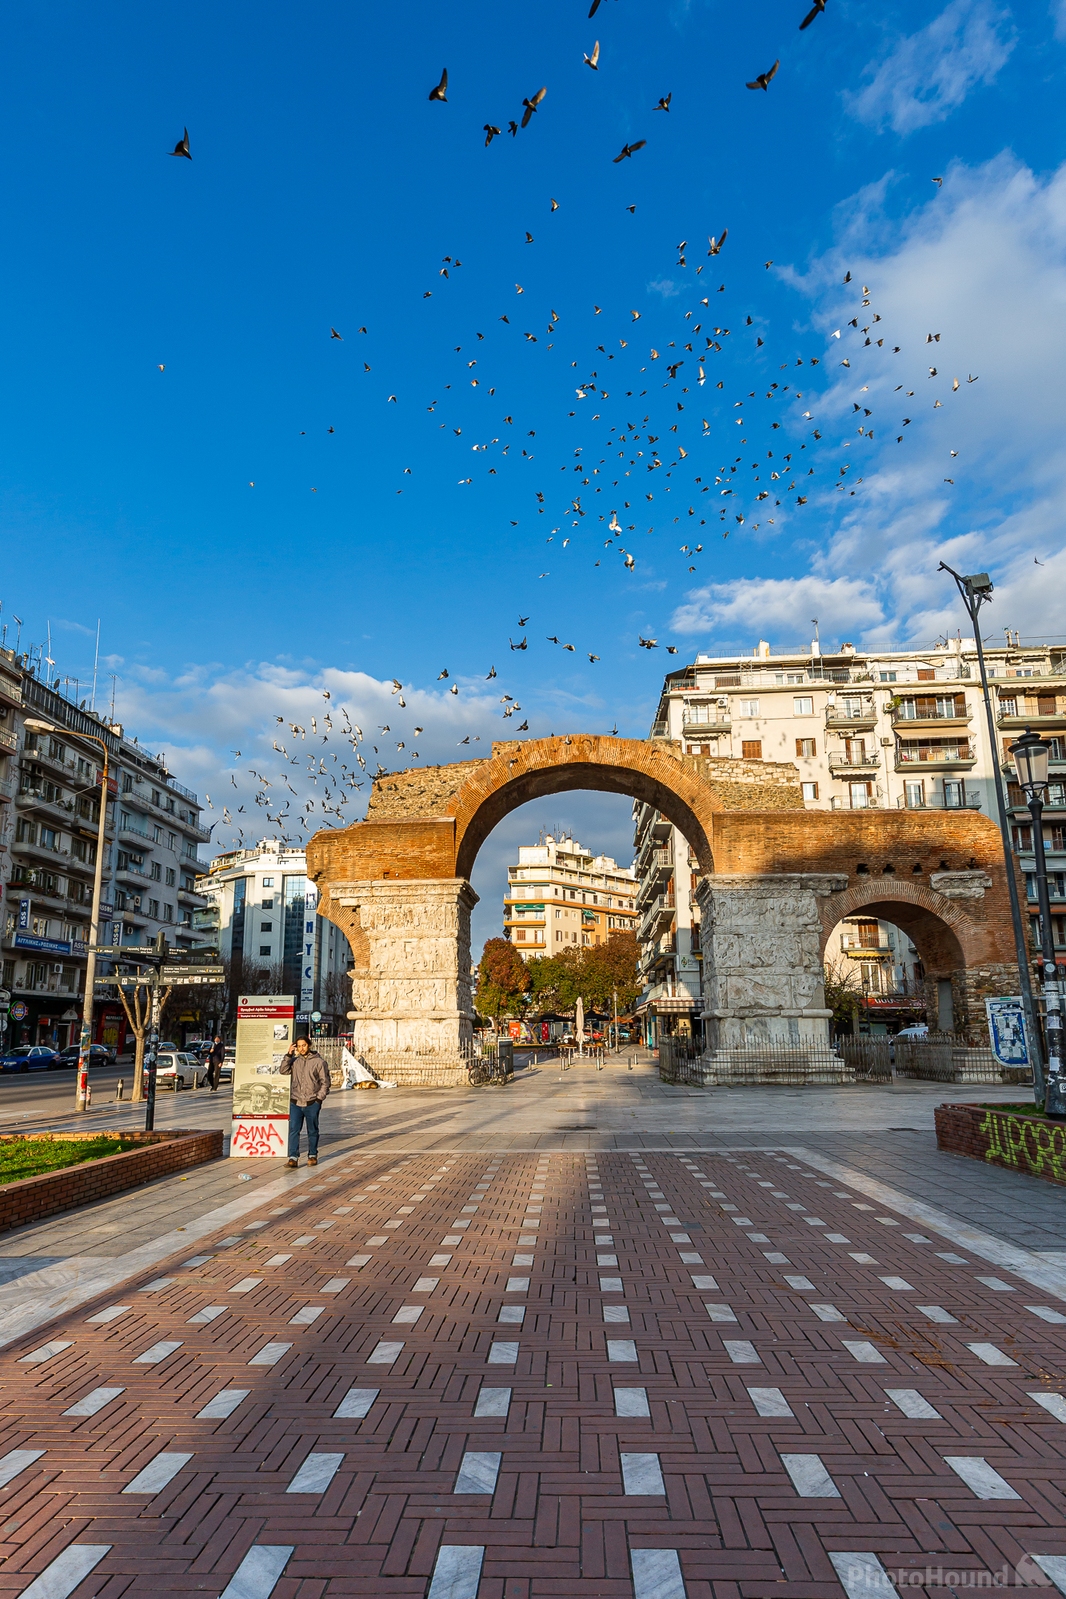 Image of Arch of Galerius by Dancho Hristov